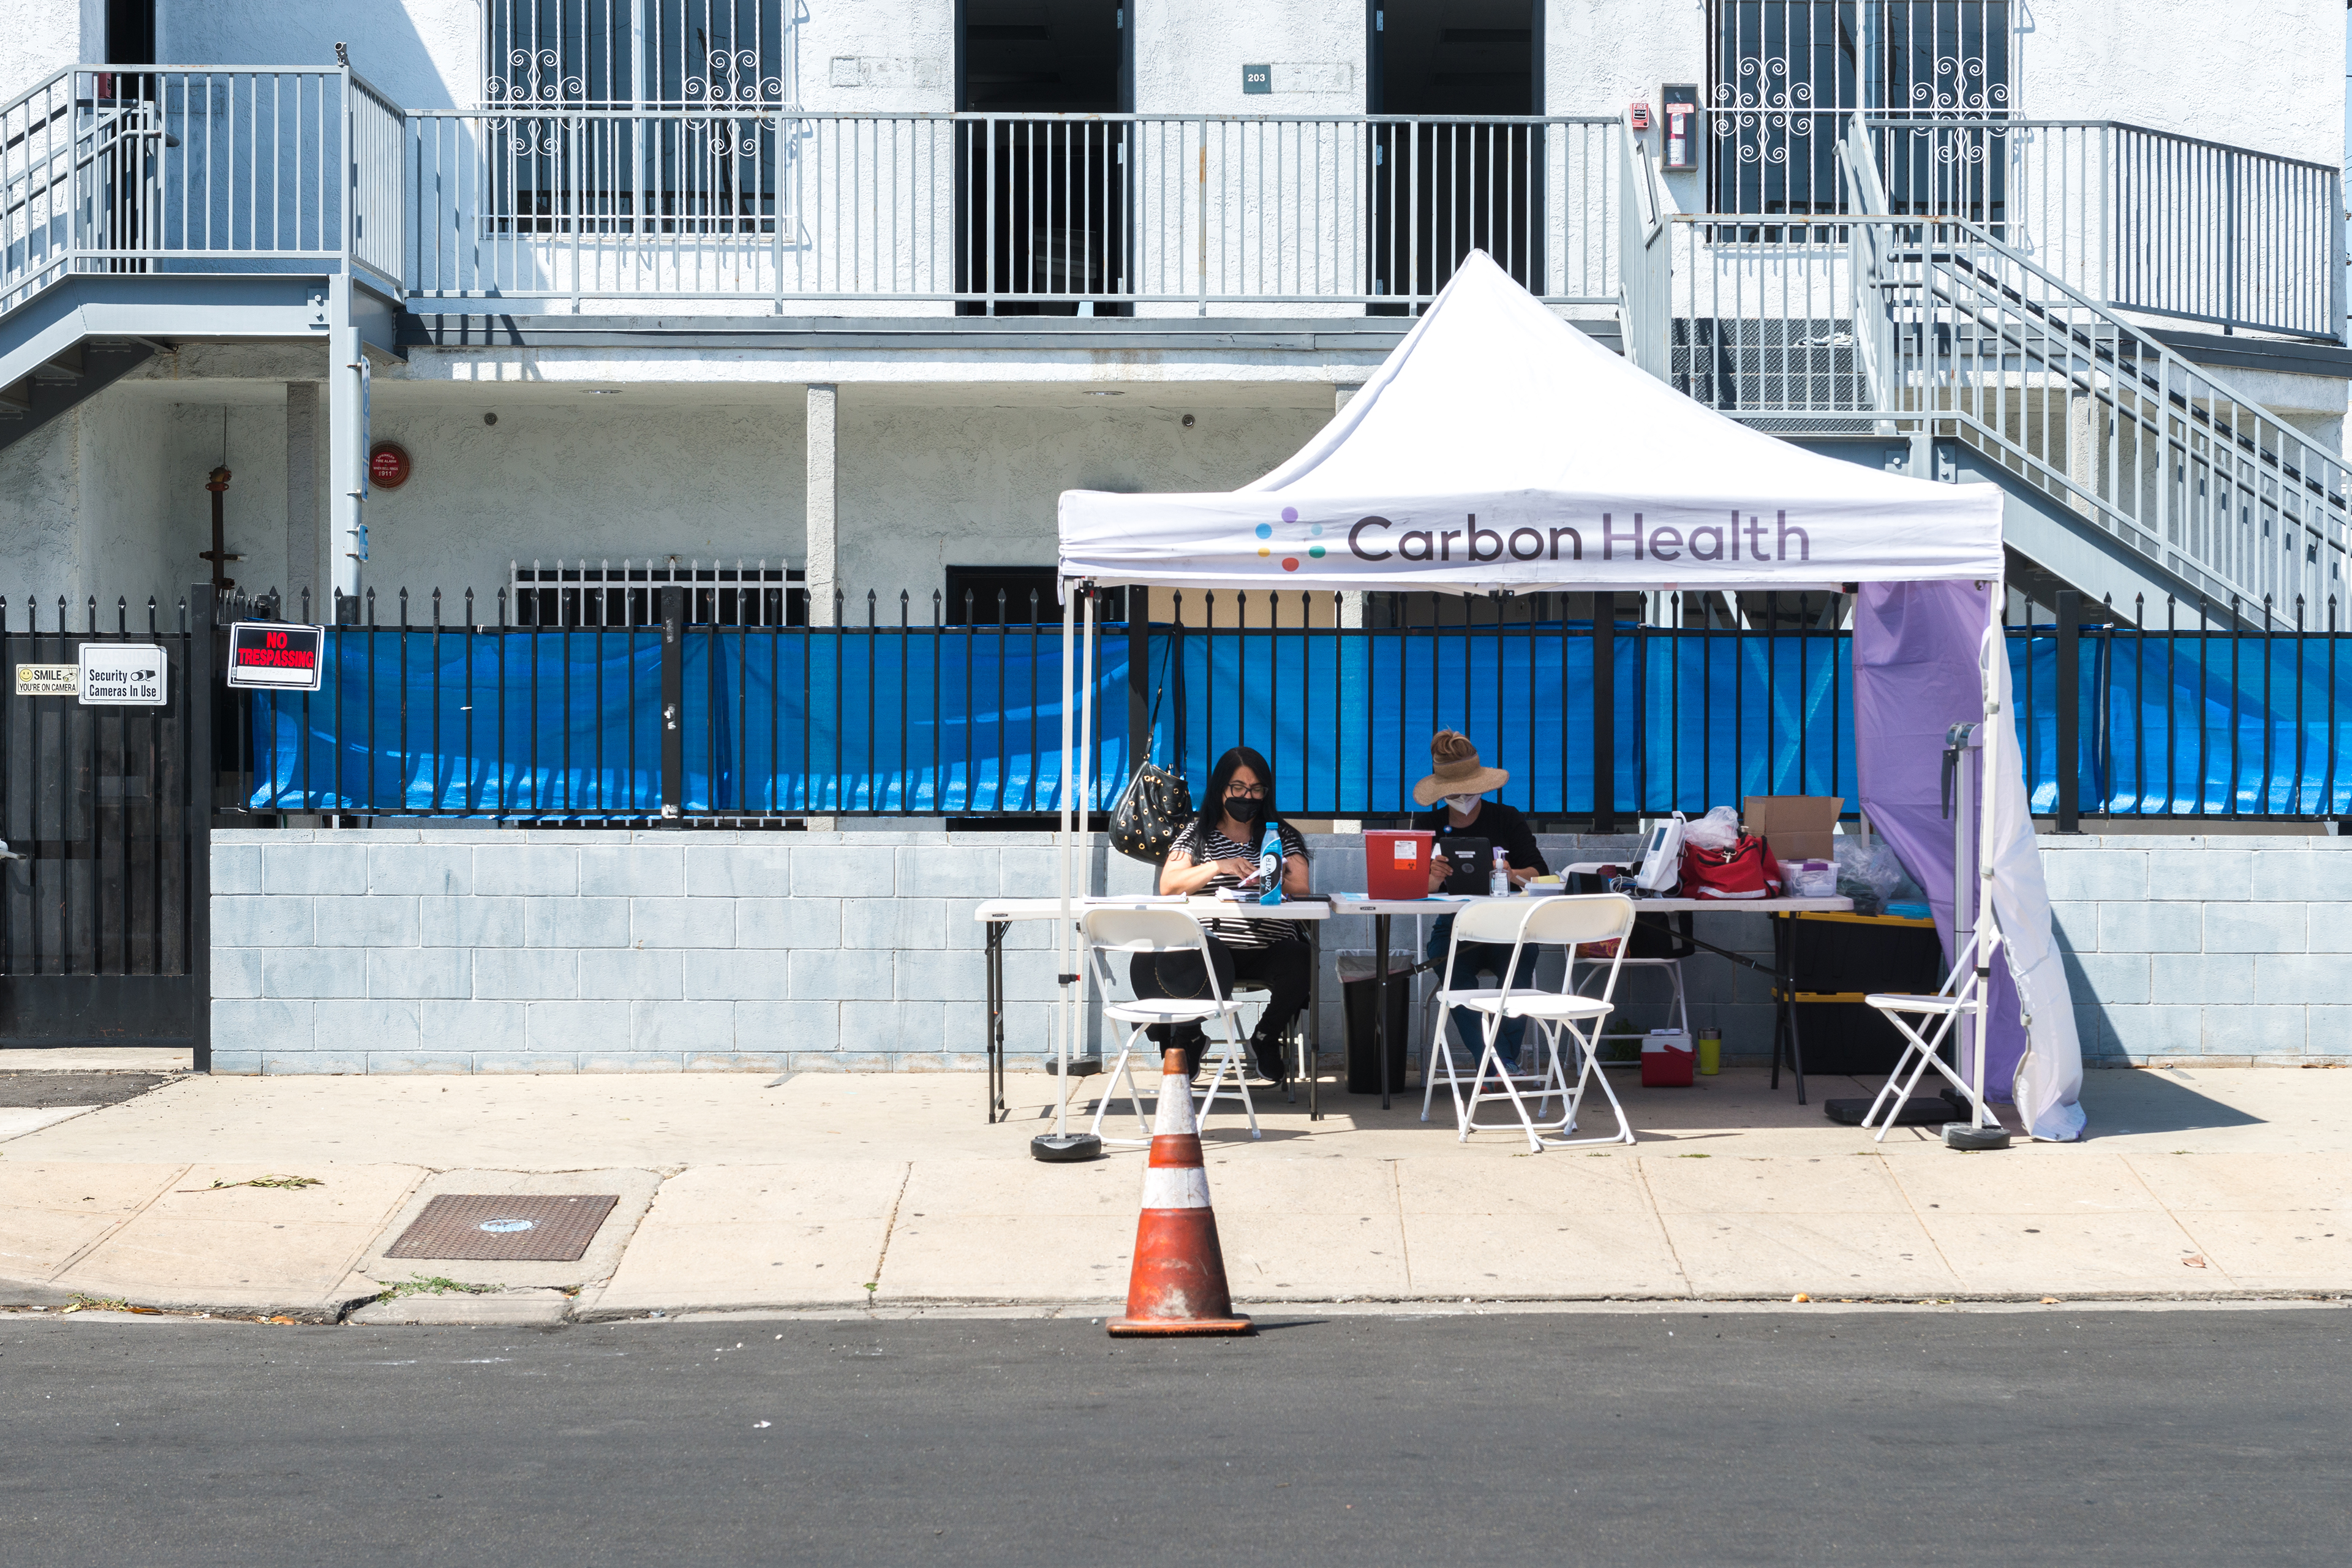 A photo showing a vaccination tent with empty chairs. Two workers sit behind a table in the tent, waiting for people to arrive.